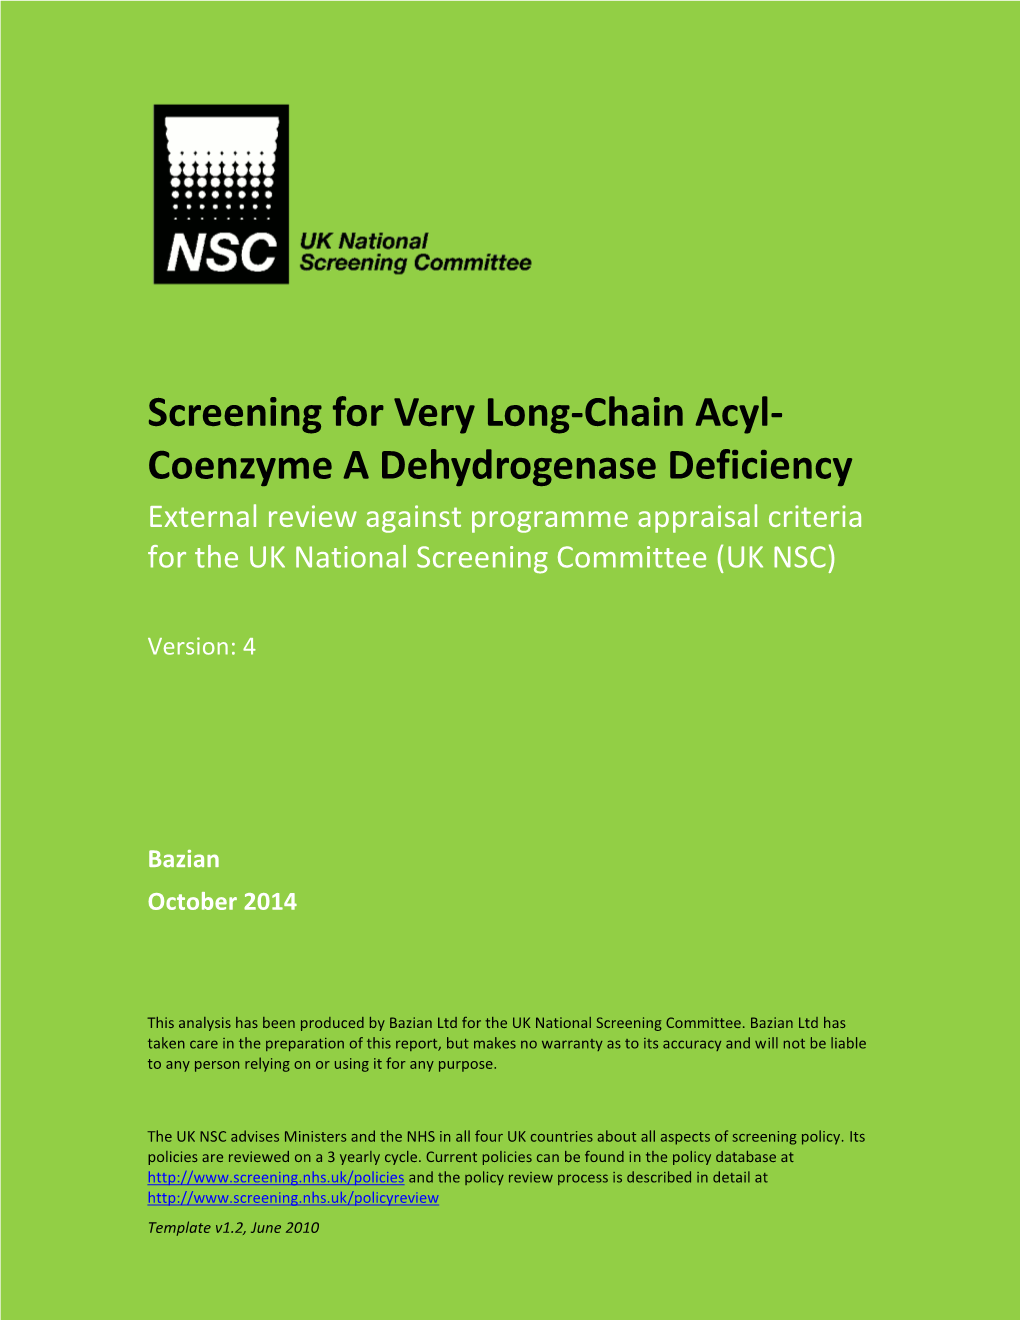 Screening for Very Long-Chain Acyl- Coenzyme a Dehydrogenase Deficiency